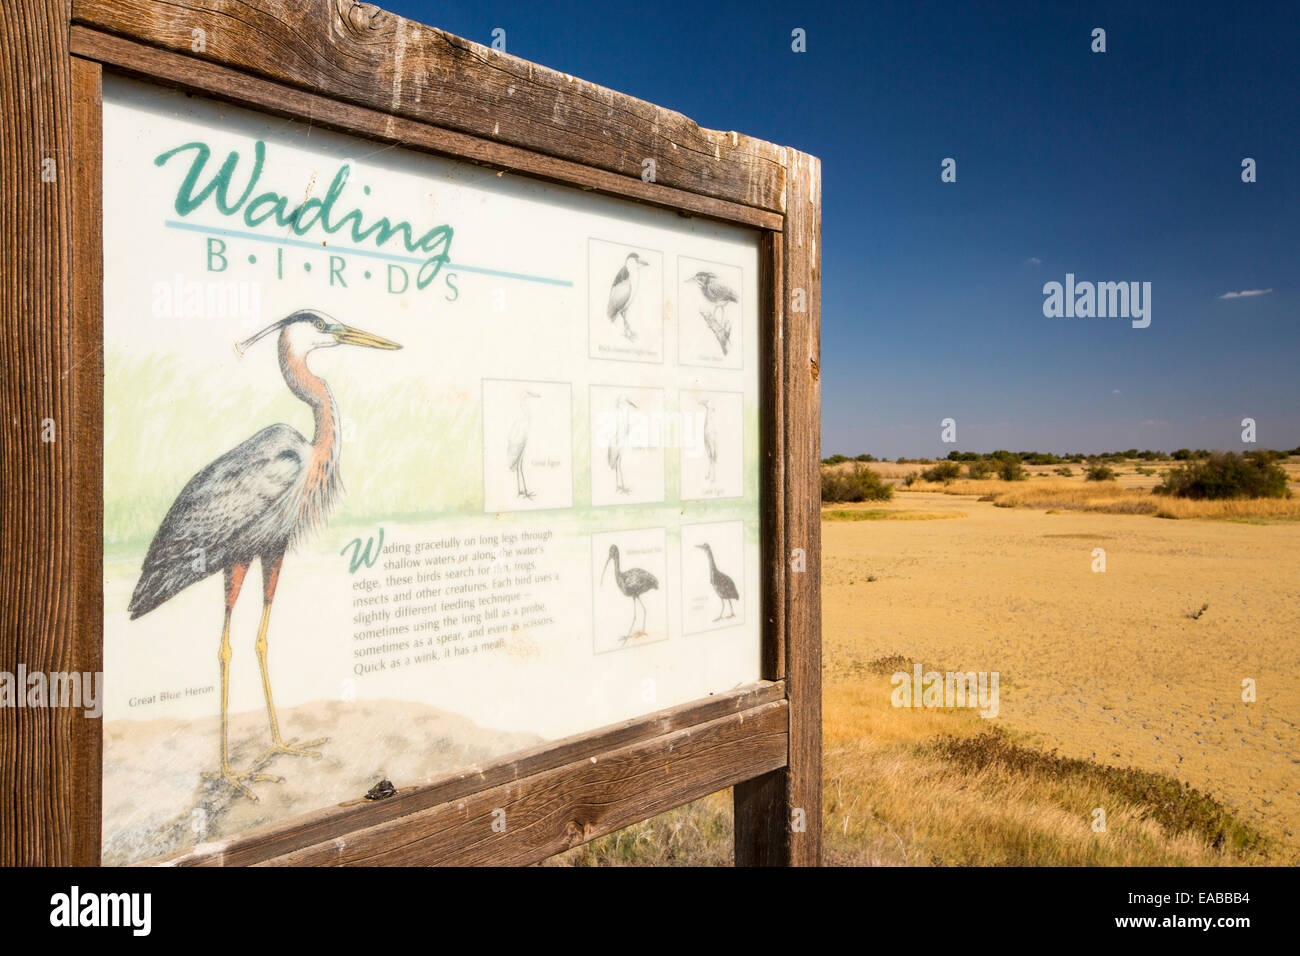 A sign about wading birds in the Kern Valley Wildlife Refuge in California's Central Valley which was created as important resting and feeding grounds for wildfowl migrating along the pacific flyway. After four years of unprecedented drought, the water shortages in California are critical. The reserve has received only 40% of its usual warer, with the result that most of the lake beds are dried up and dessicated, leaving the birds nowhere to go. Stock Photo